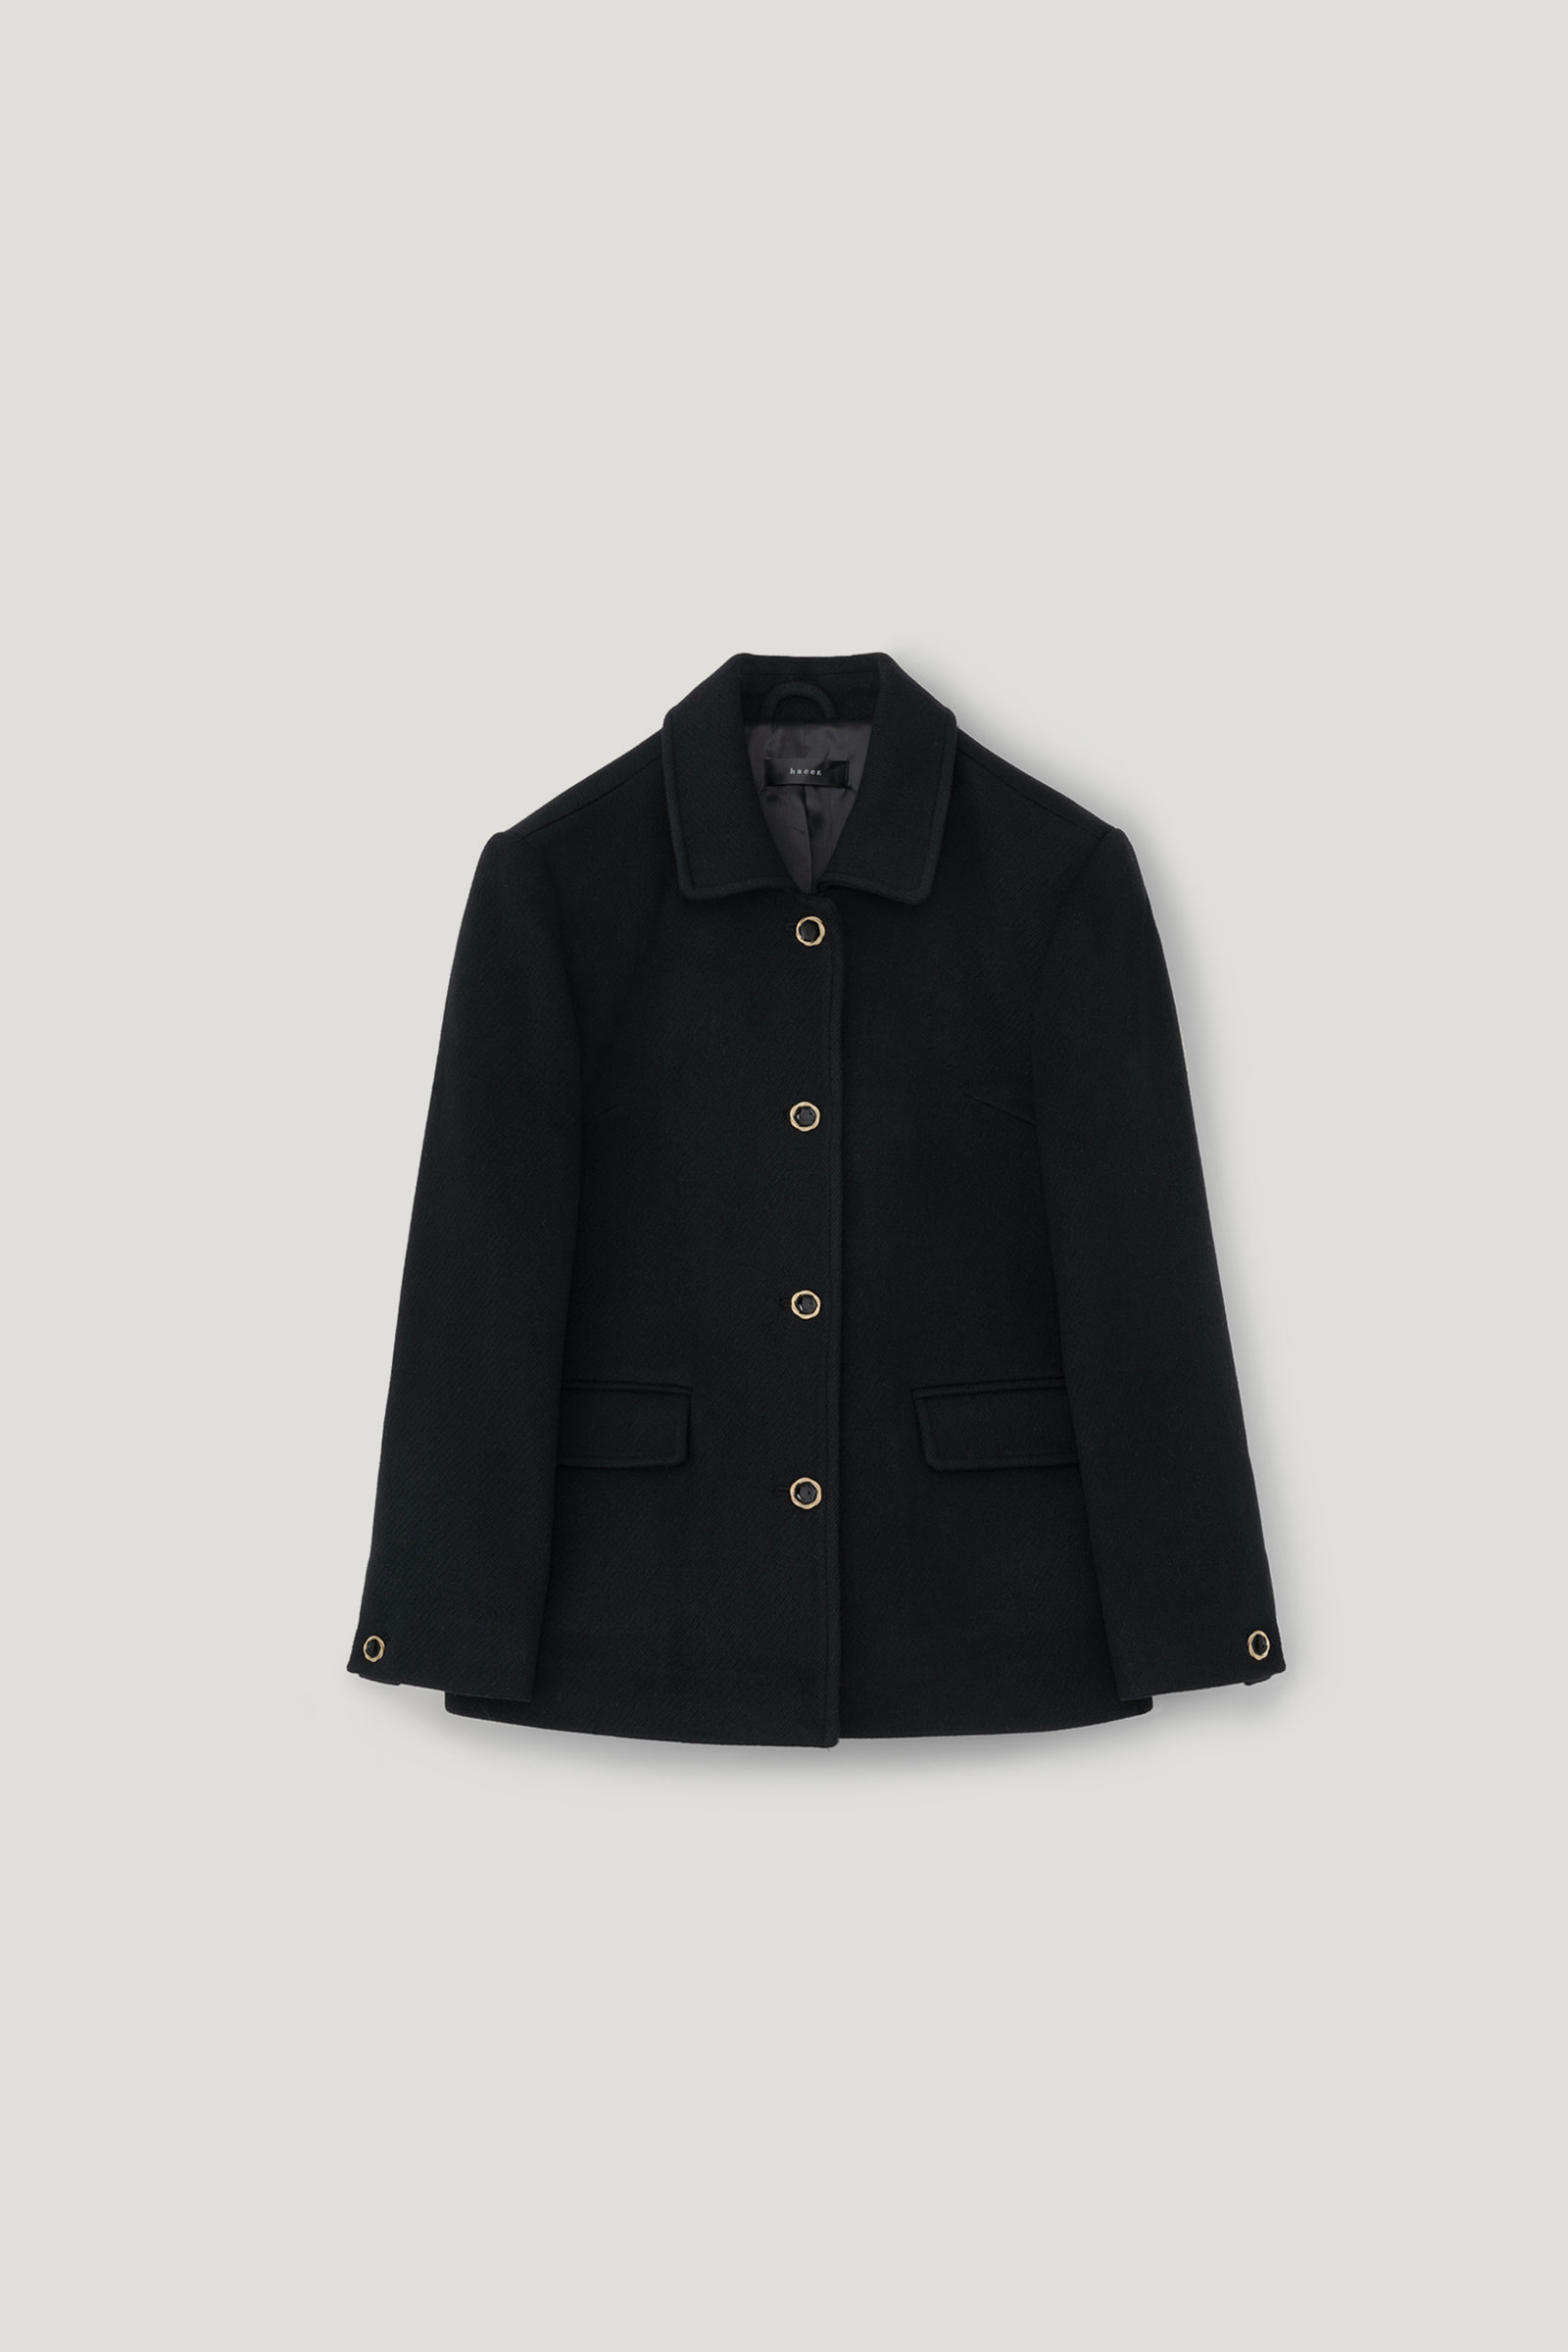 [9th] Classic 4 Button Wool Jacket